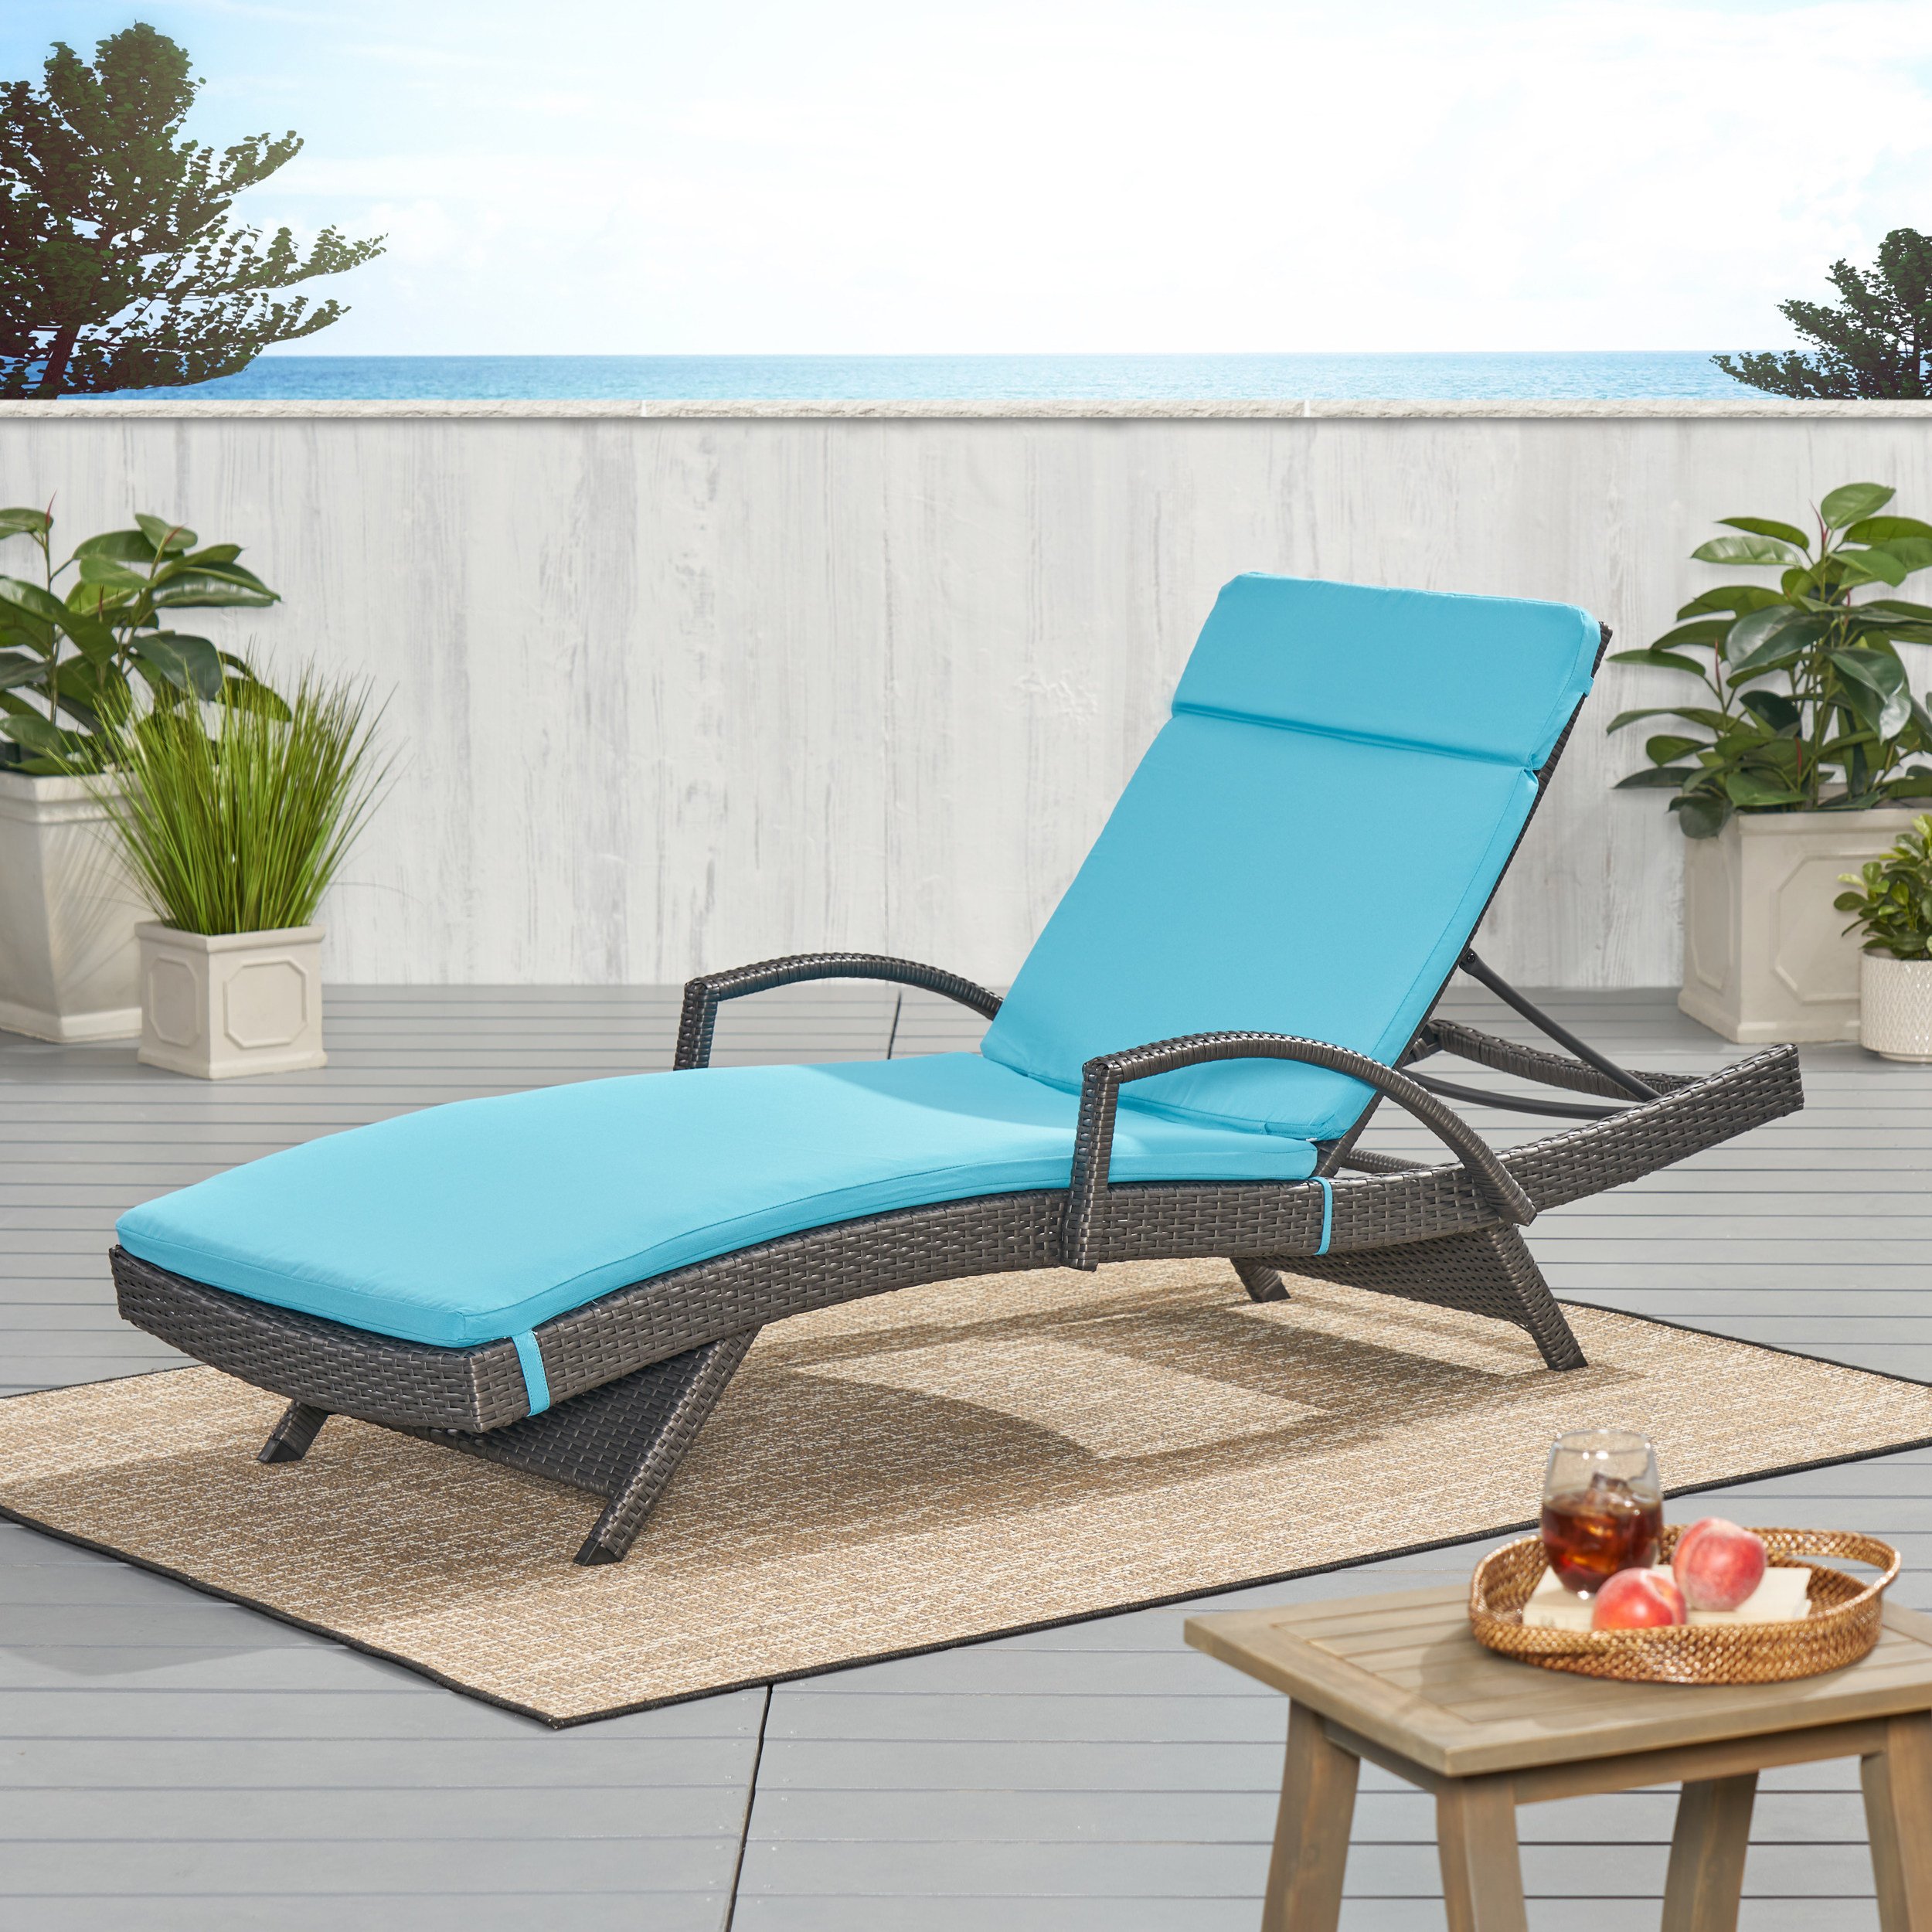 Soleil Outdoor Water Resistant Chaise Lounge Cushion - Navy Blue